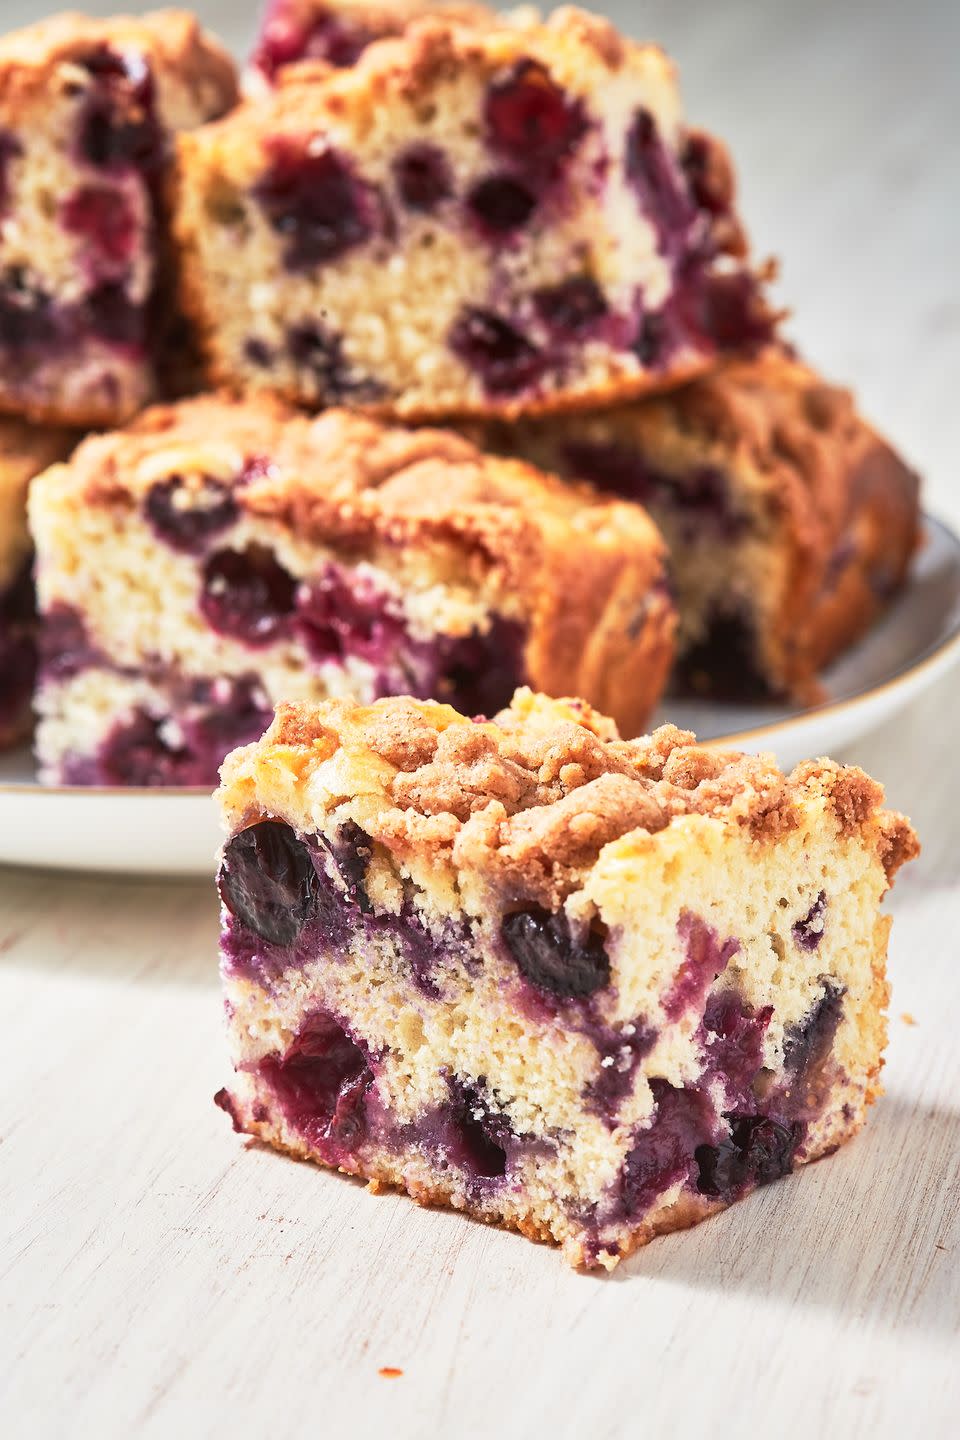 52) Blueberry Buckle